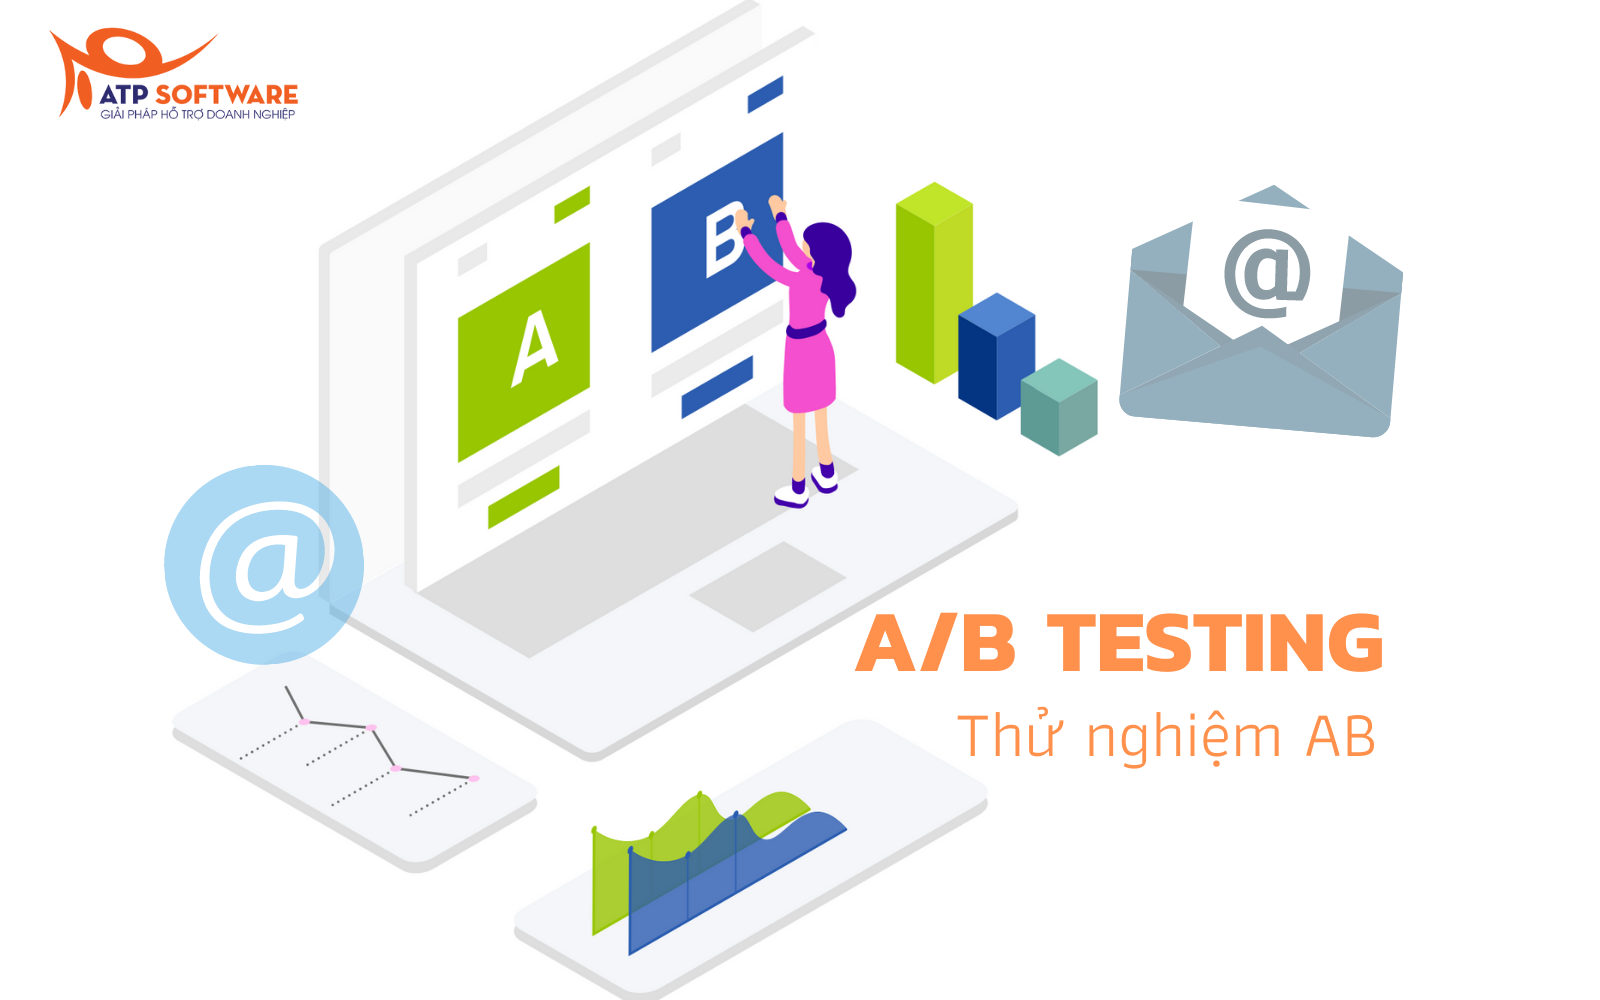 A/B testing email